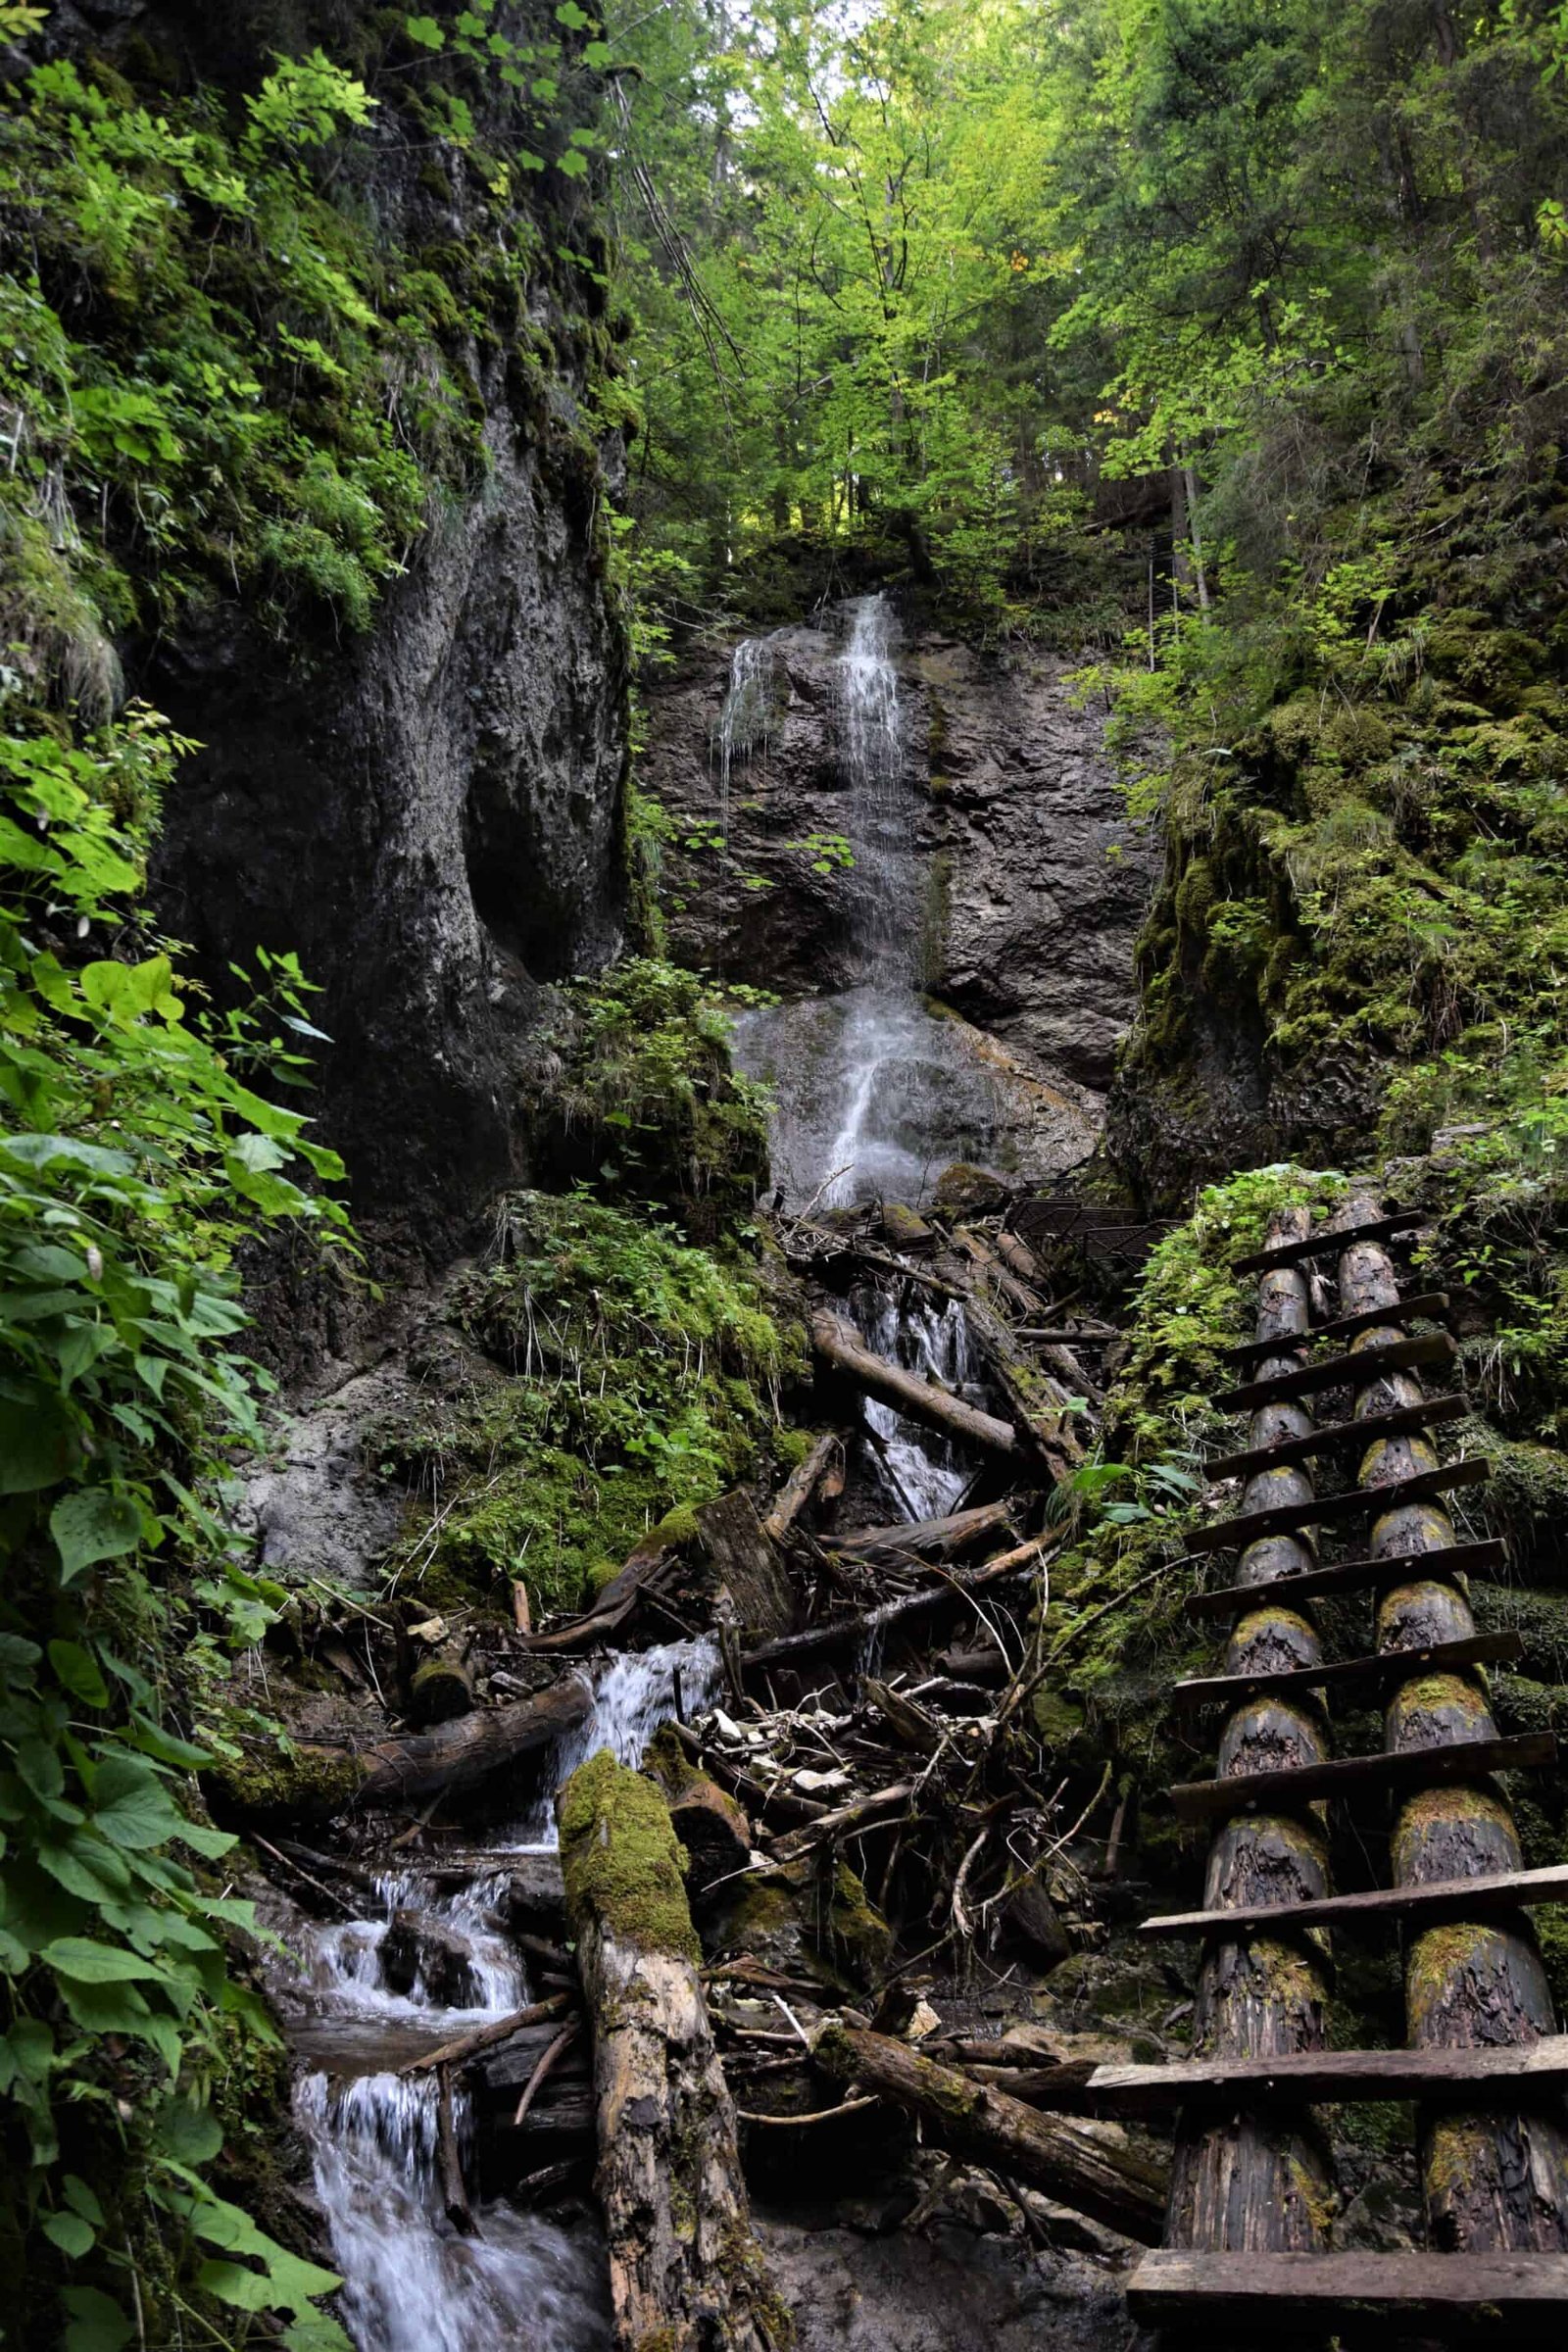 a wooden ladder leaning agains the wet rock next to a cascading waterfall surrounded by trees, Sokolí potok Gorge, Slovakia